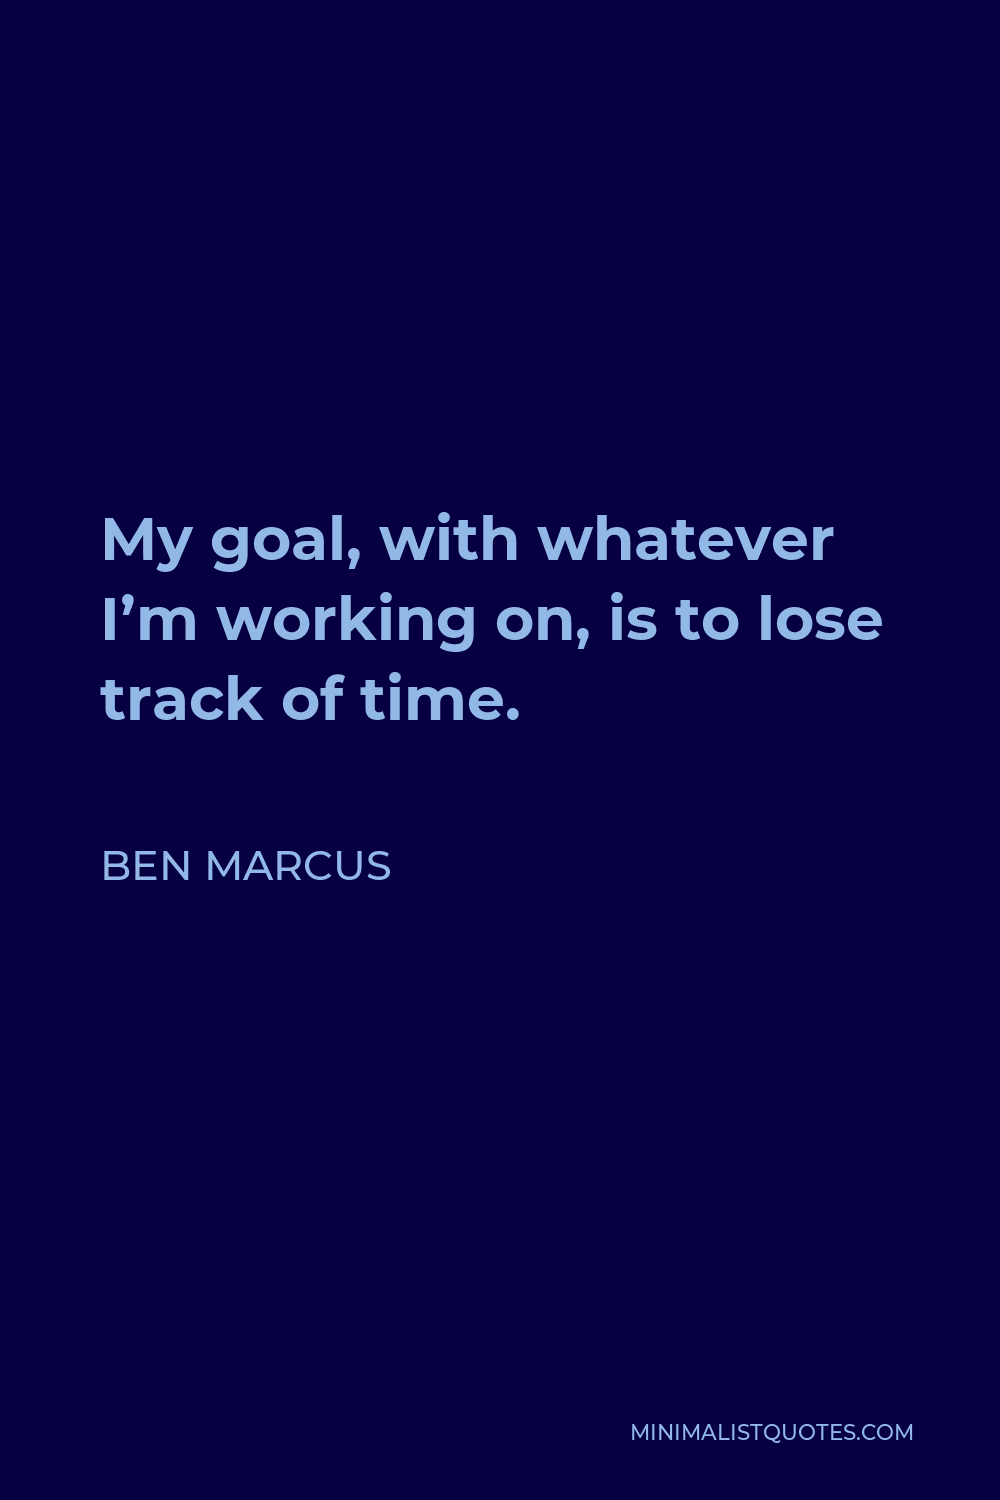 Ben Marcus Quote - My goal, with whatever I’m working on, is to lose track of time.